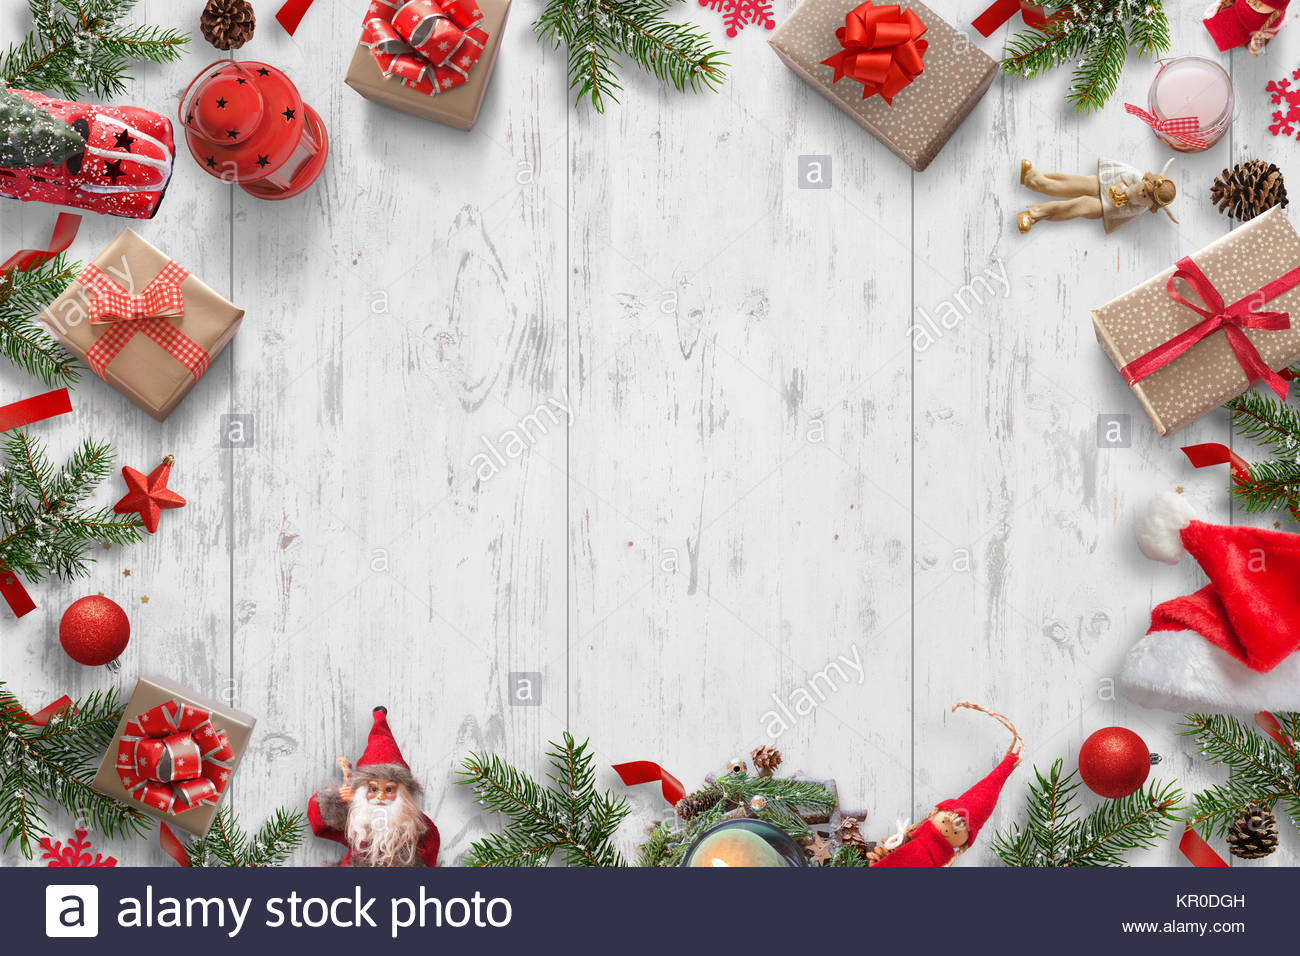 Christmas background on white wooden desk with Christmas tree